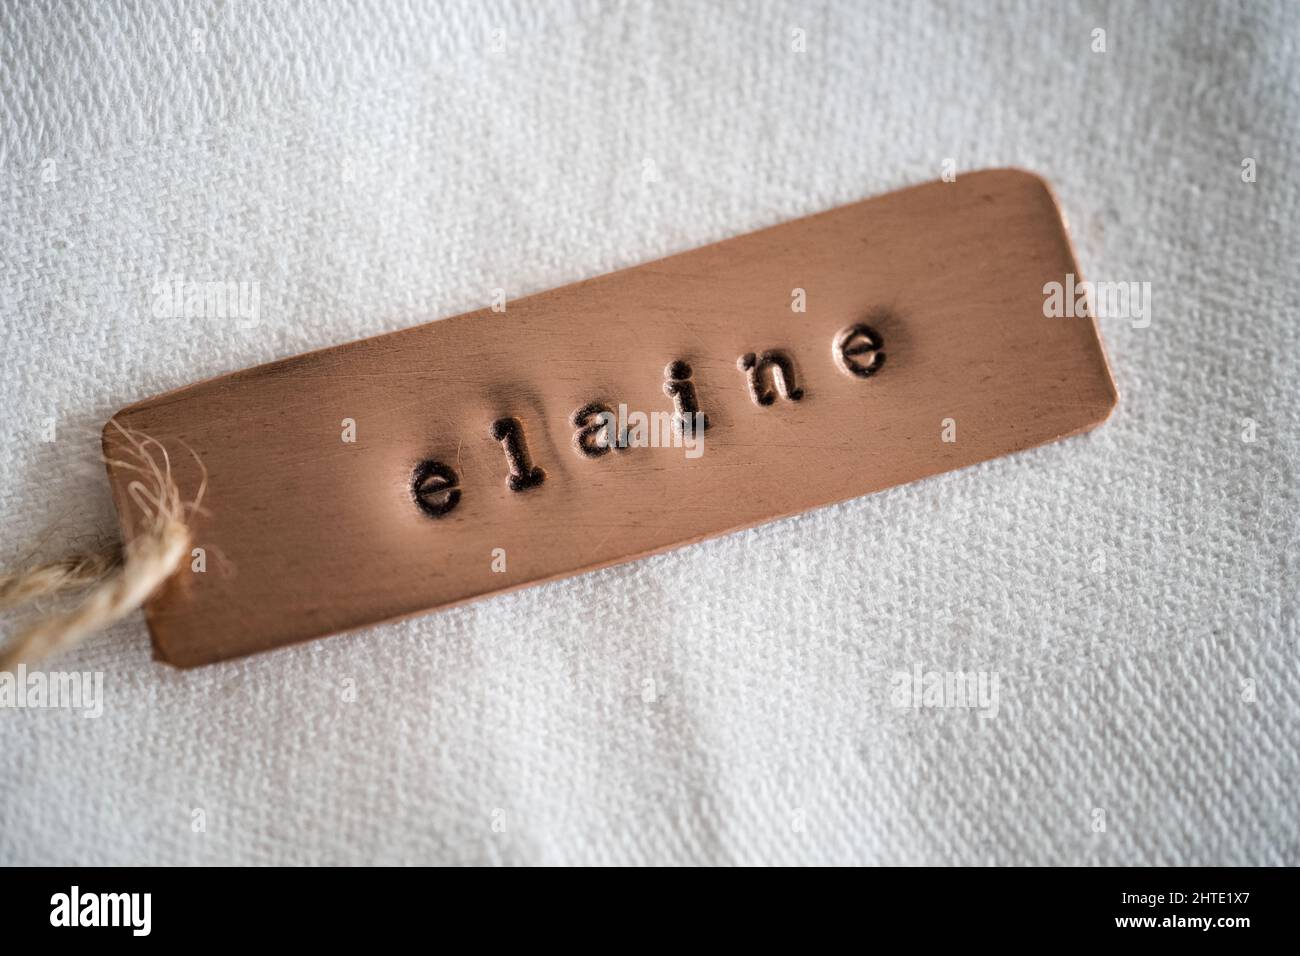 Elaine identity engraved name dog tag copper metal name plate badge. Shiny and clean stamped letters on retro trinket pendent. Stock Photo